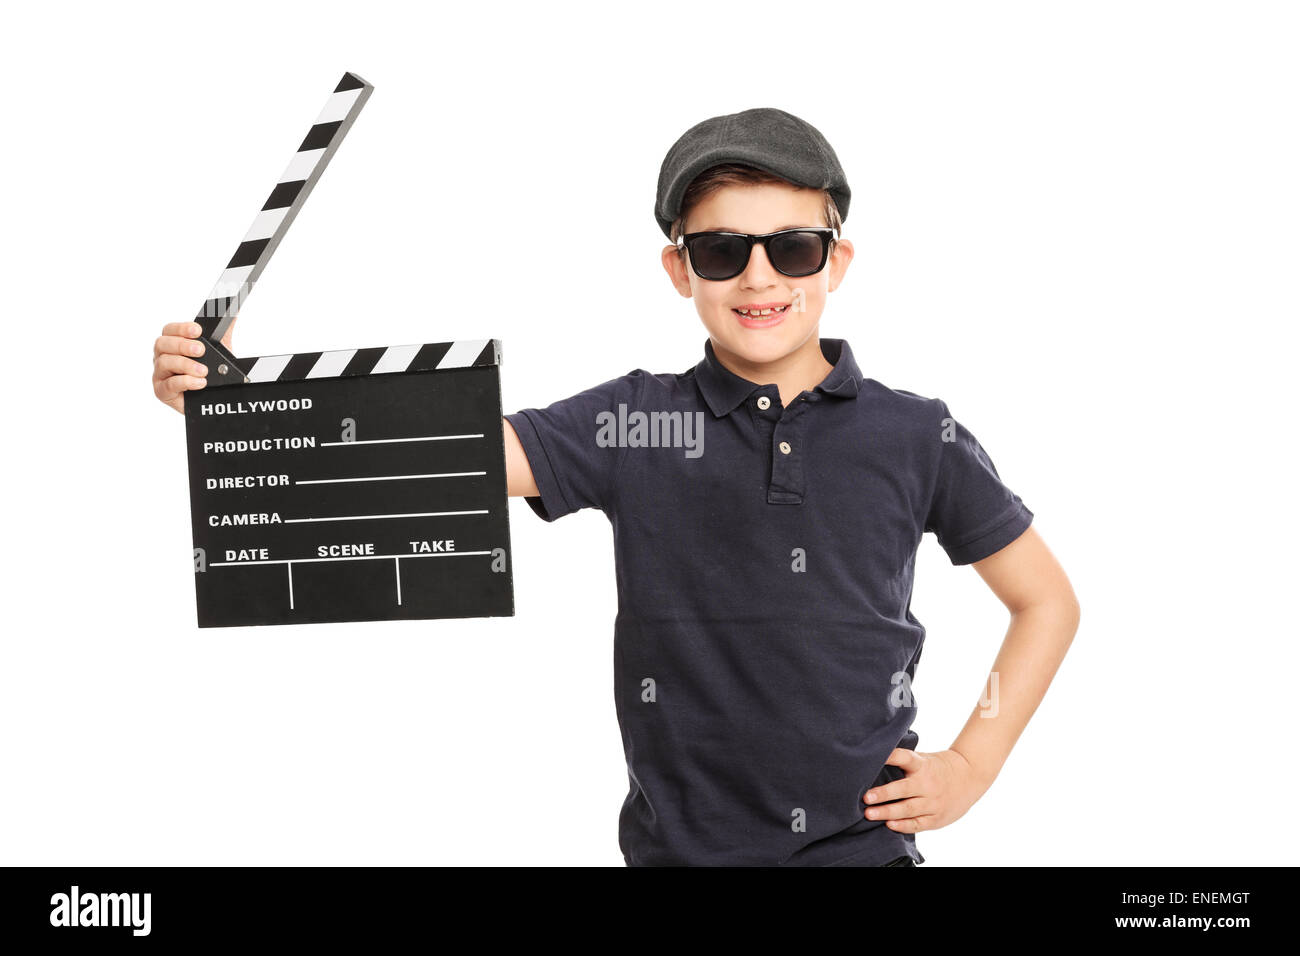 Little boy with a beret and sunglasses holding a movie clapperboard isolated on white background Stock Photo